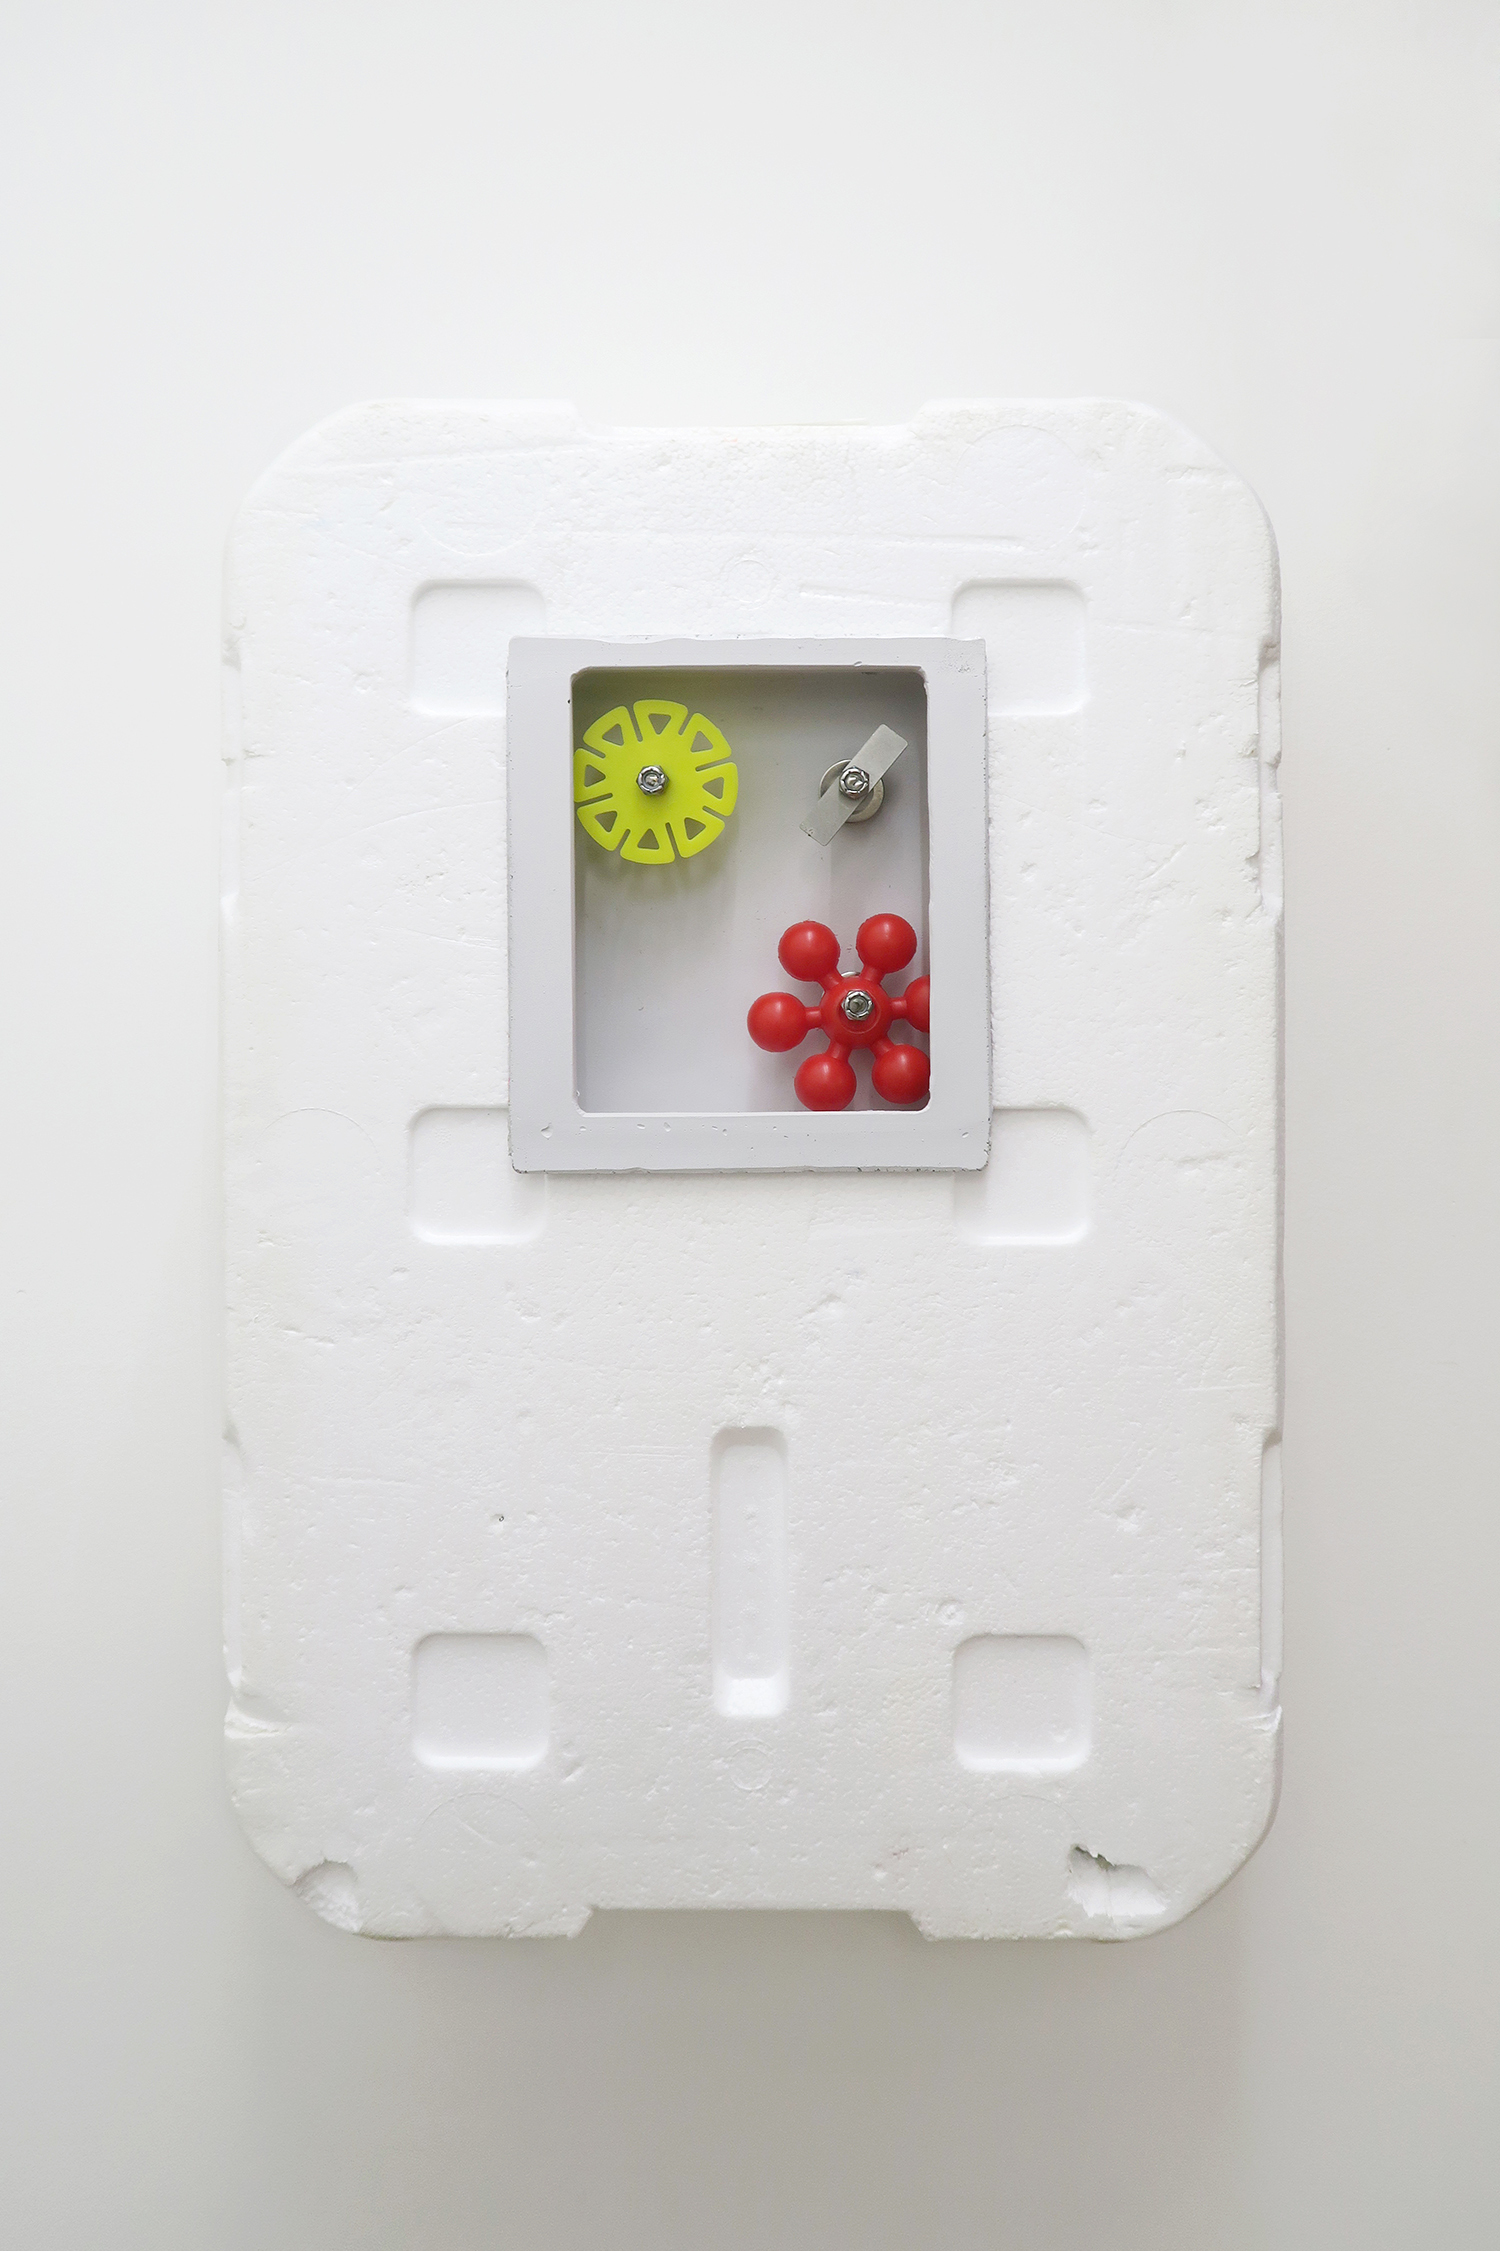 Simplify Complexity V Styrofoam box, brightly colored plastic pieces spin easily on stainless steel rods, 30 × 39.6 × 10 cm